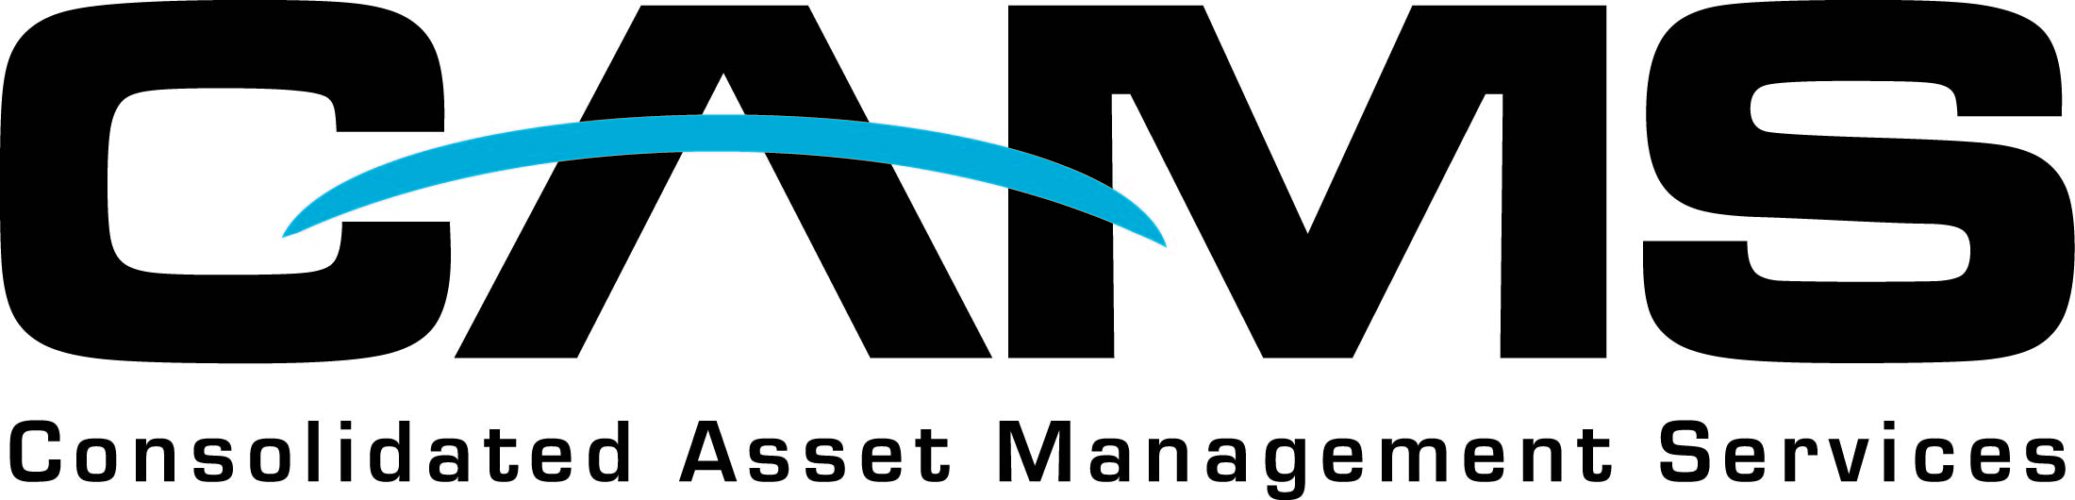 Marketing & Communications, Consolidated Asset Management Services (CAMS)